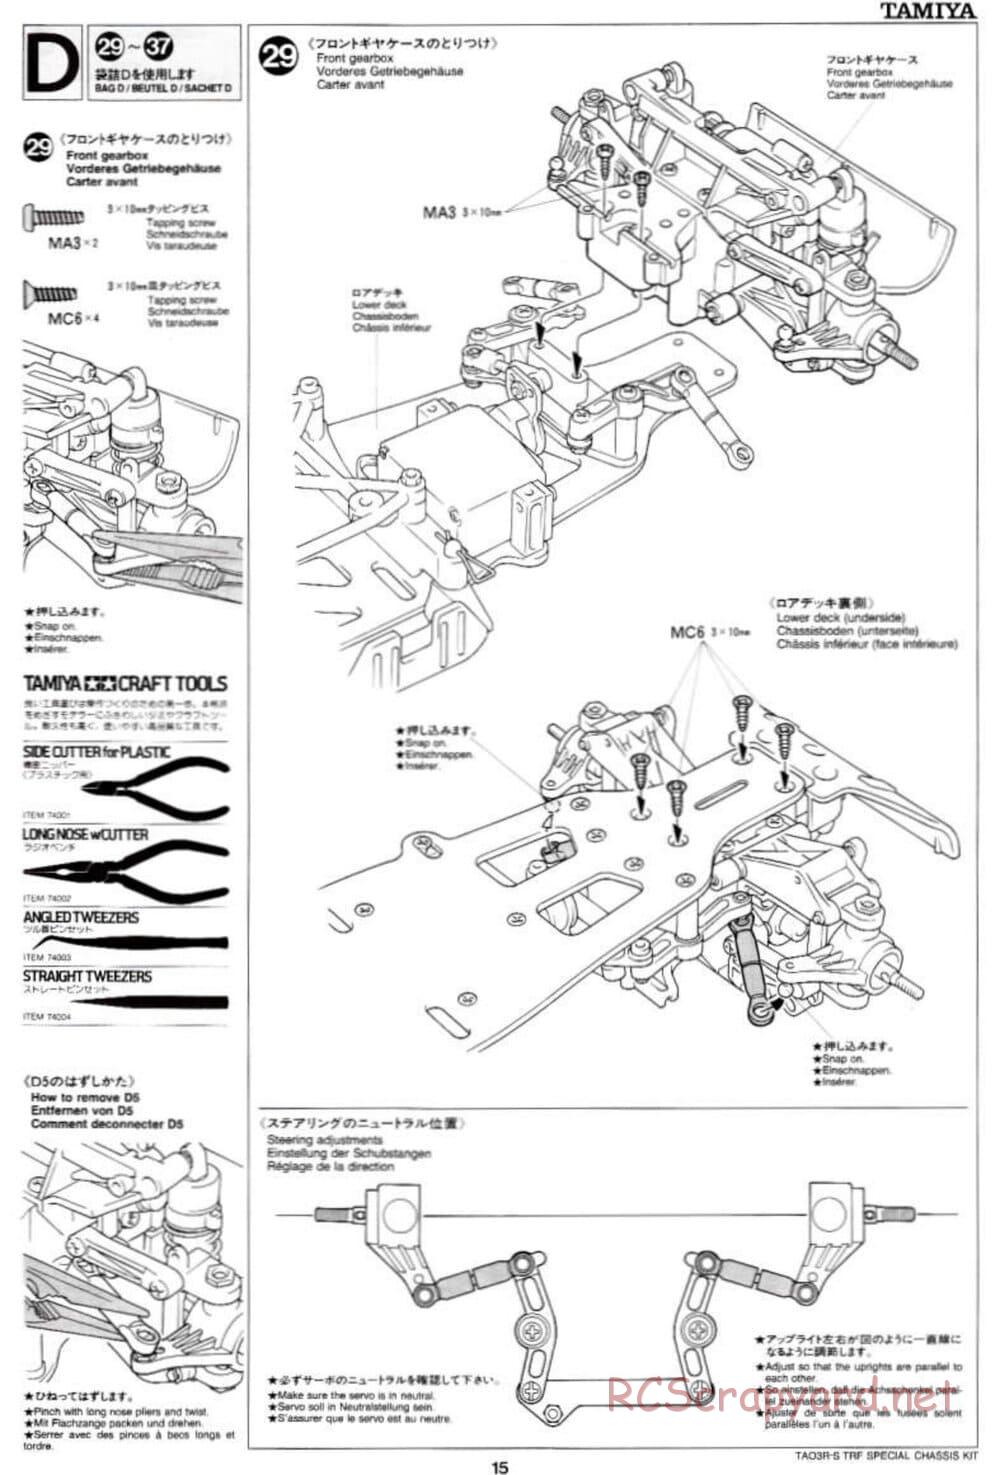 Tamiya - TA-03RS TRF Special Chassis - Manual - Page 15